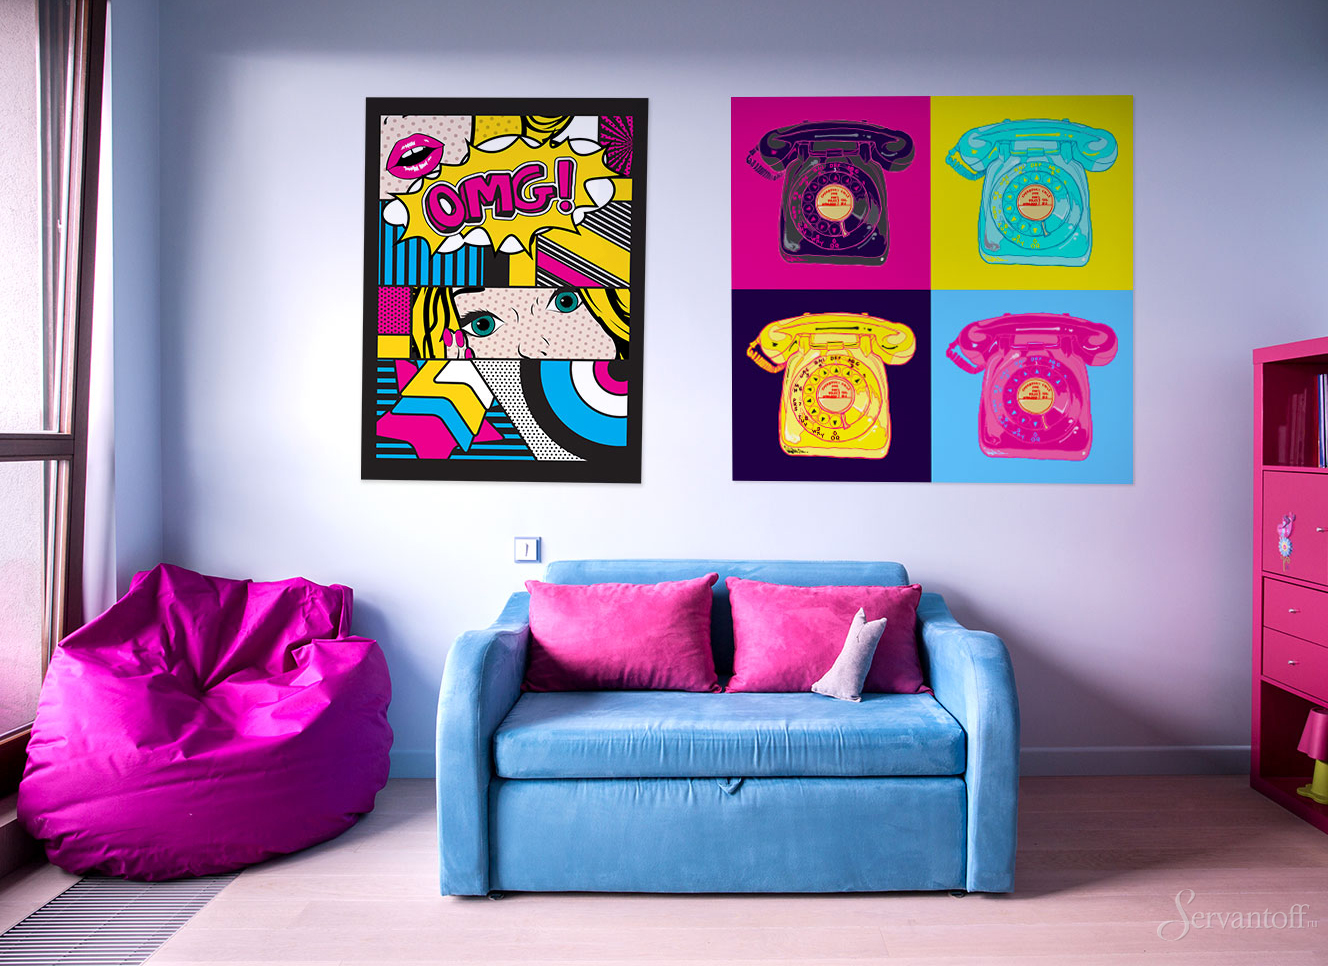 variant of the unusual interior of the room in the style of pop art